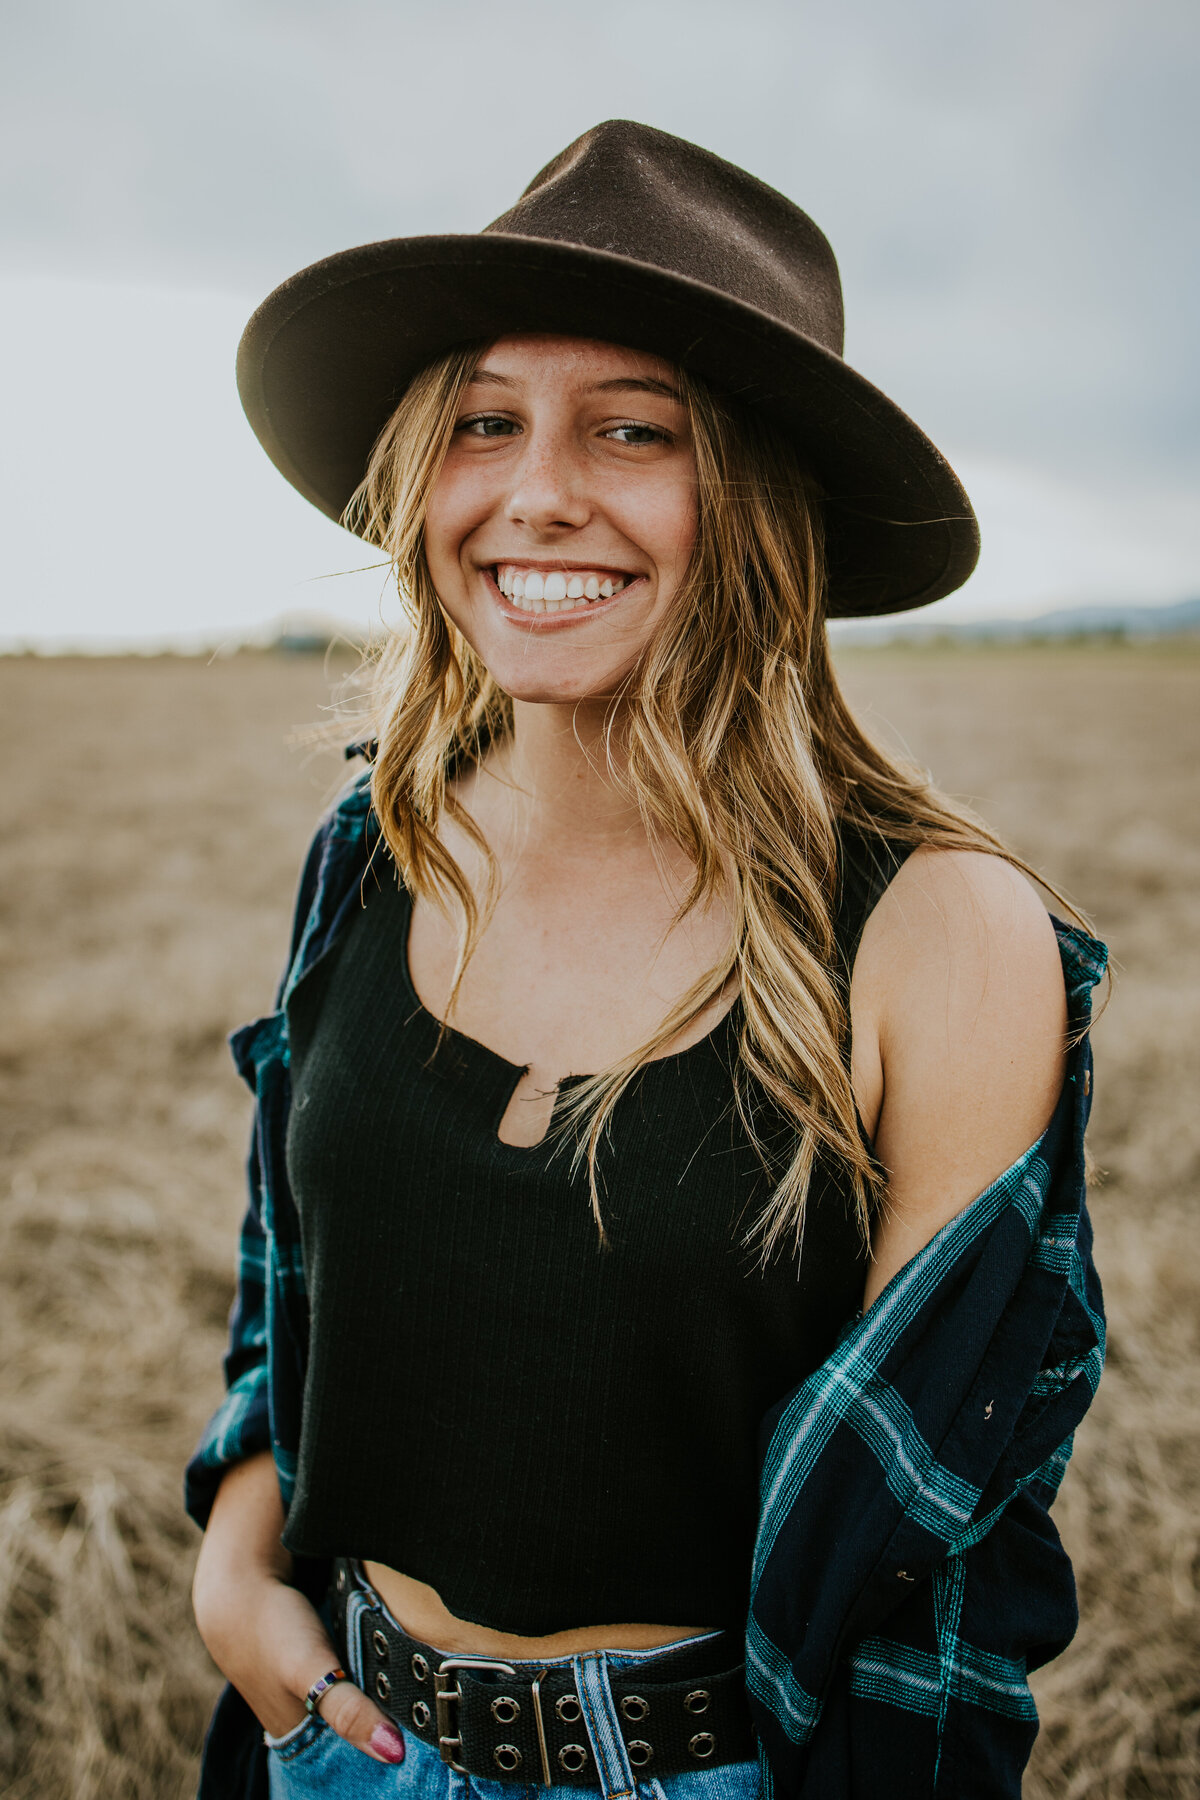 Young girl smiles at camera while wearing fedora in field.